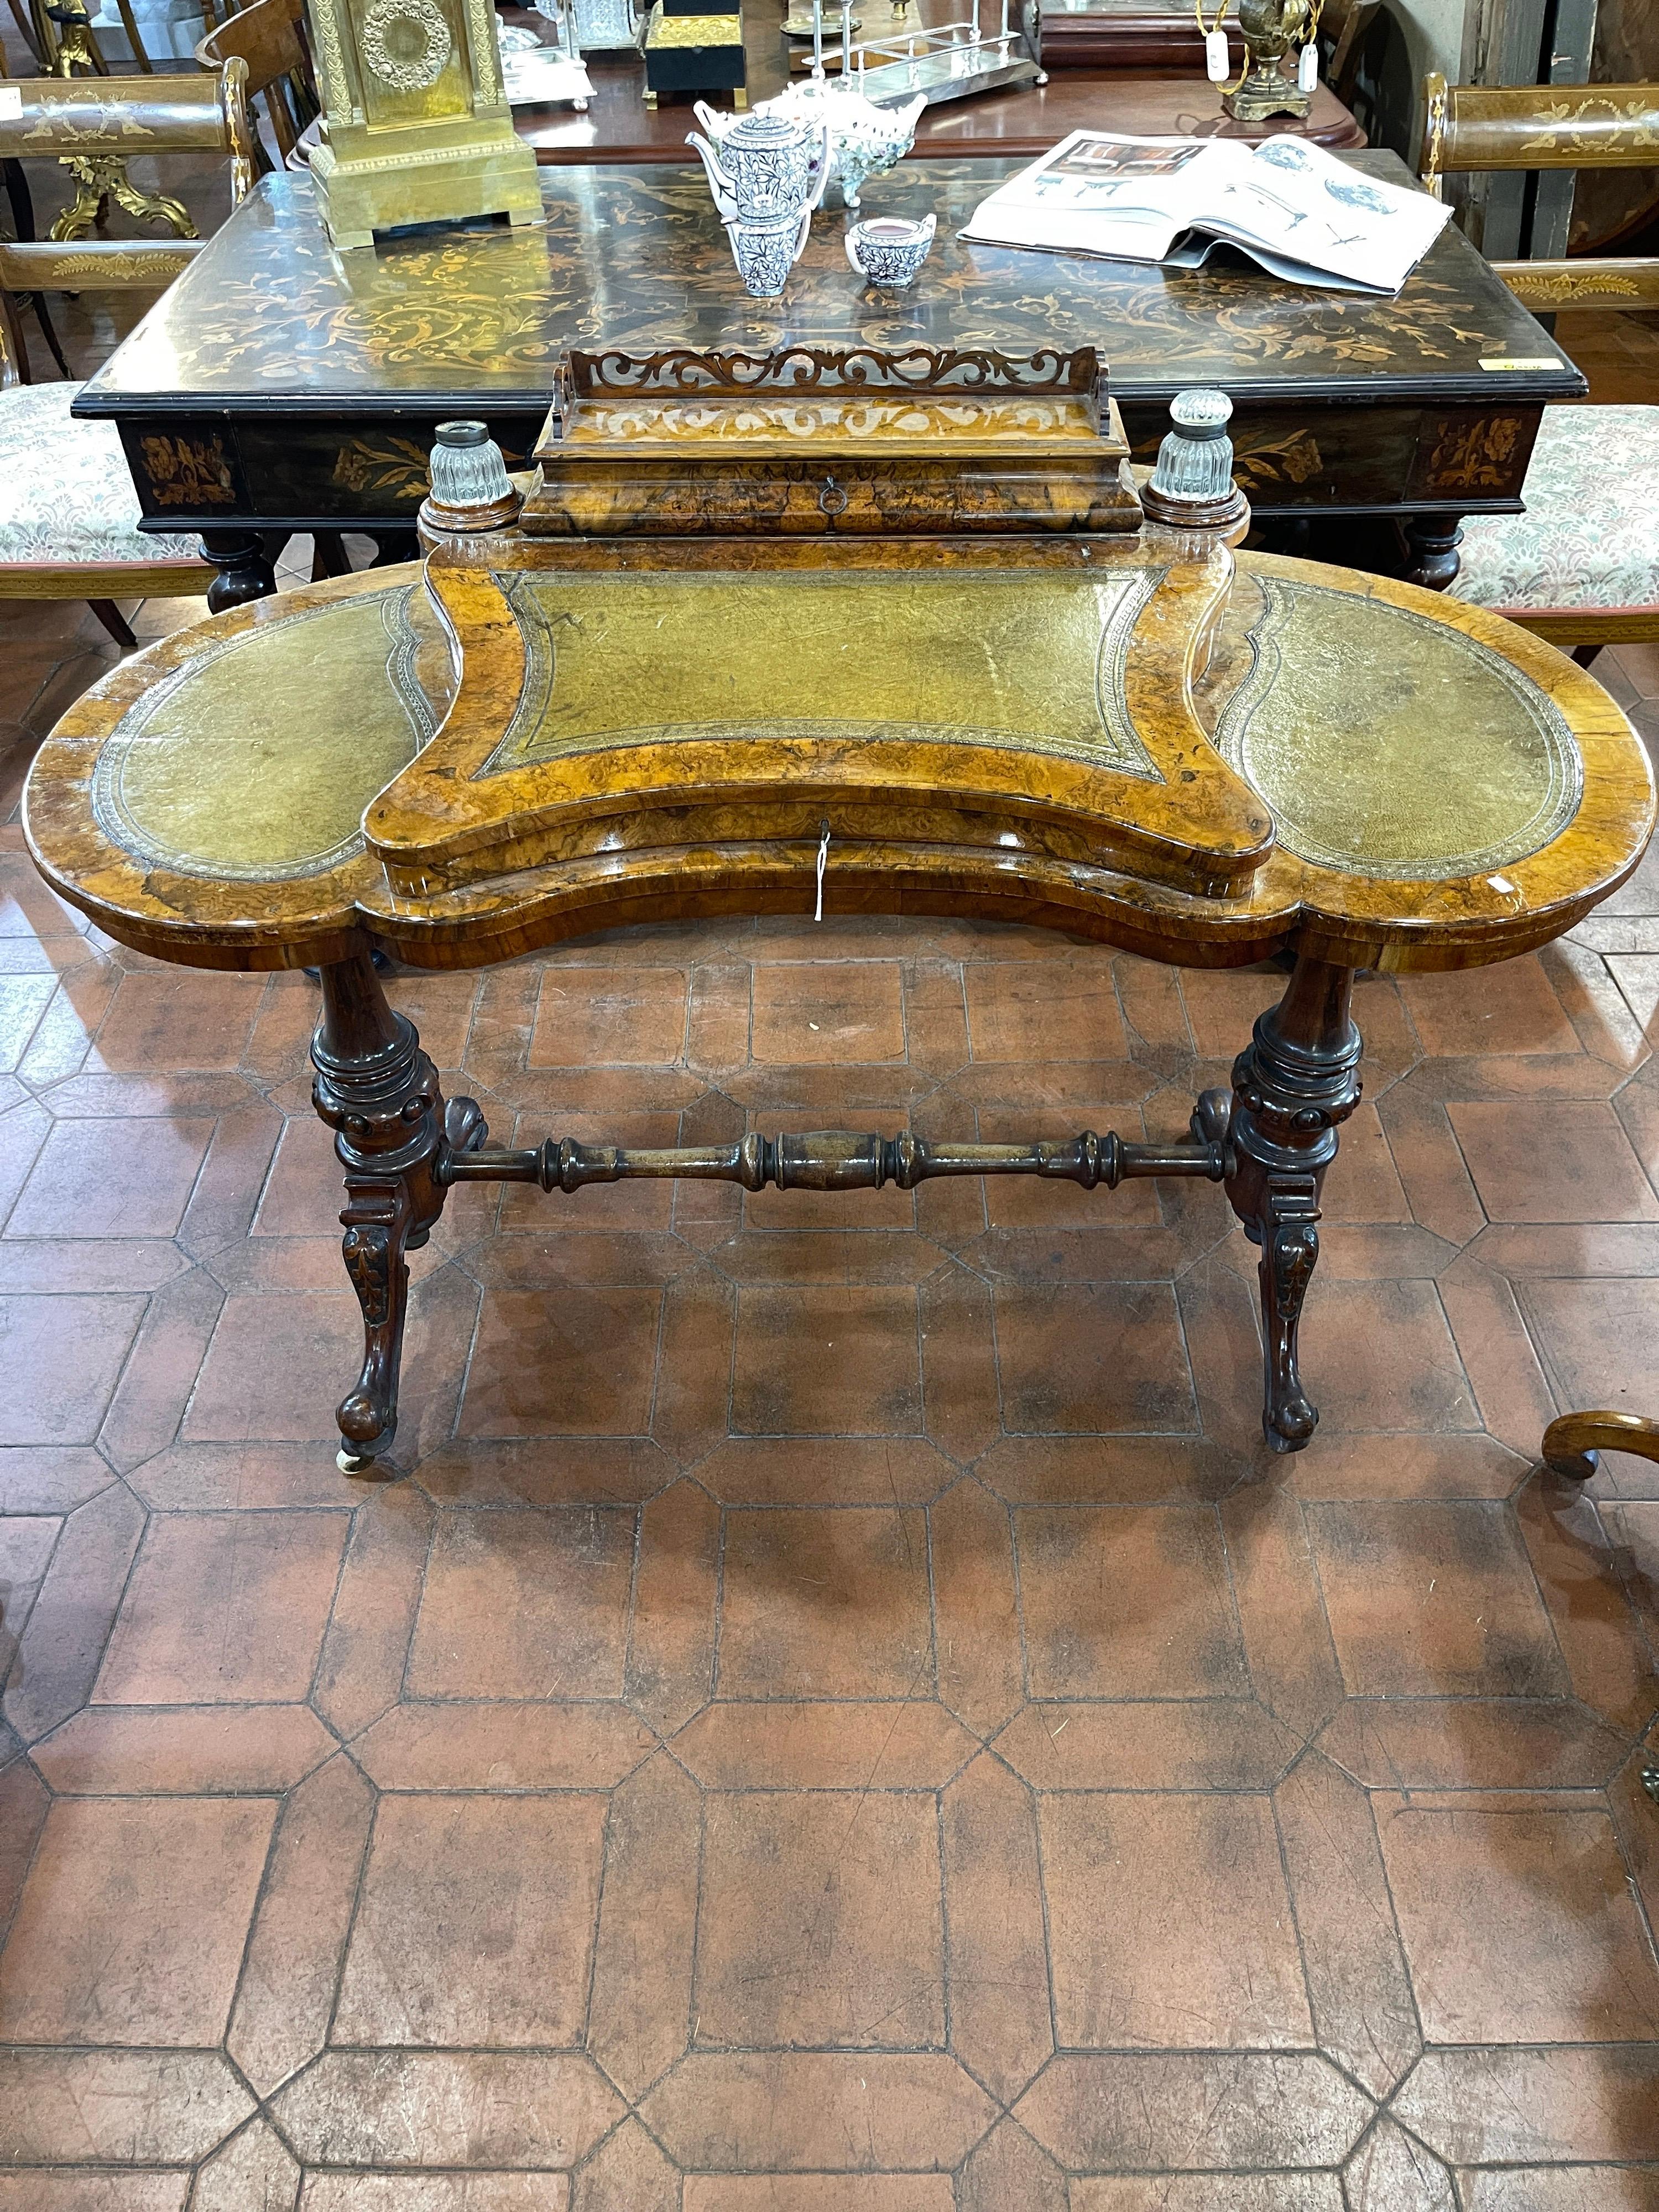 Victorian burr walnut kidney shaped ladies writing table.
Fantastic example of an English ladies desk writing table, from the early Victorian period.Fantastic quality walnut burr wood ,with leather on the top still original. In the central part of